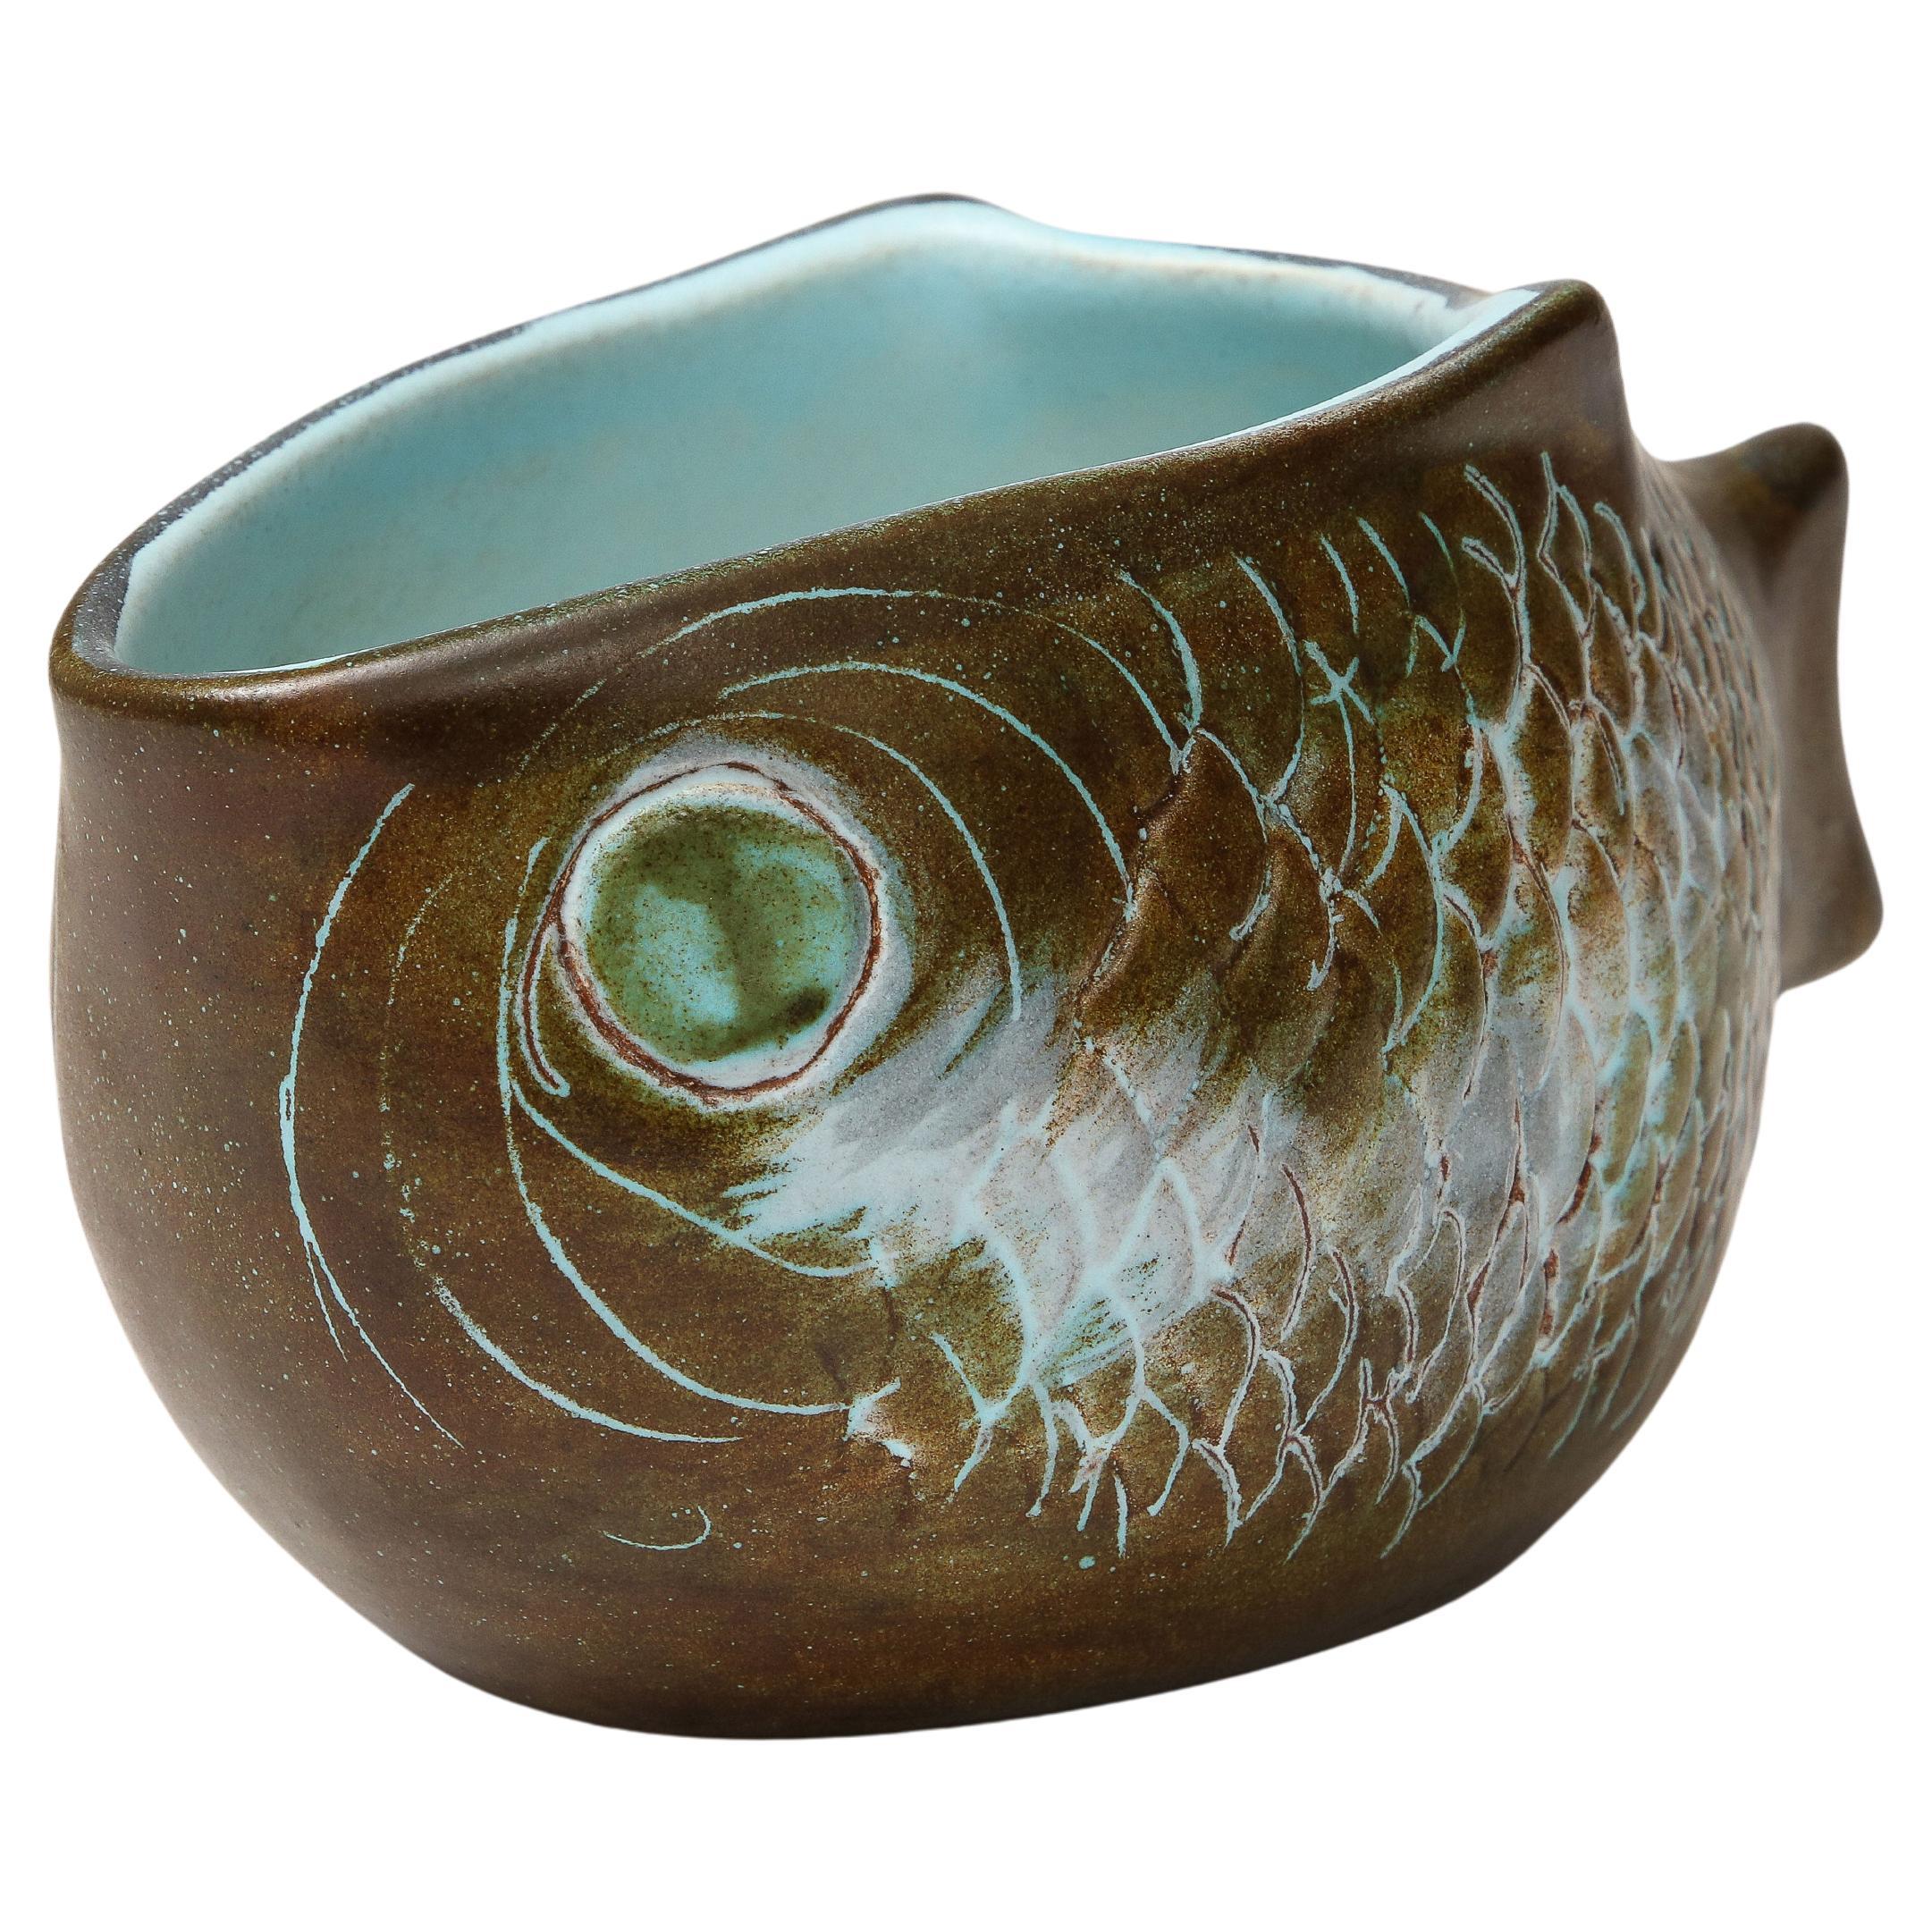 Glazed Ceramic Bowl in the Shape of a Fish, Guillot, c. 1960